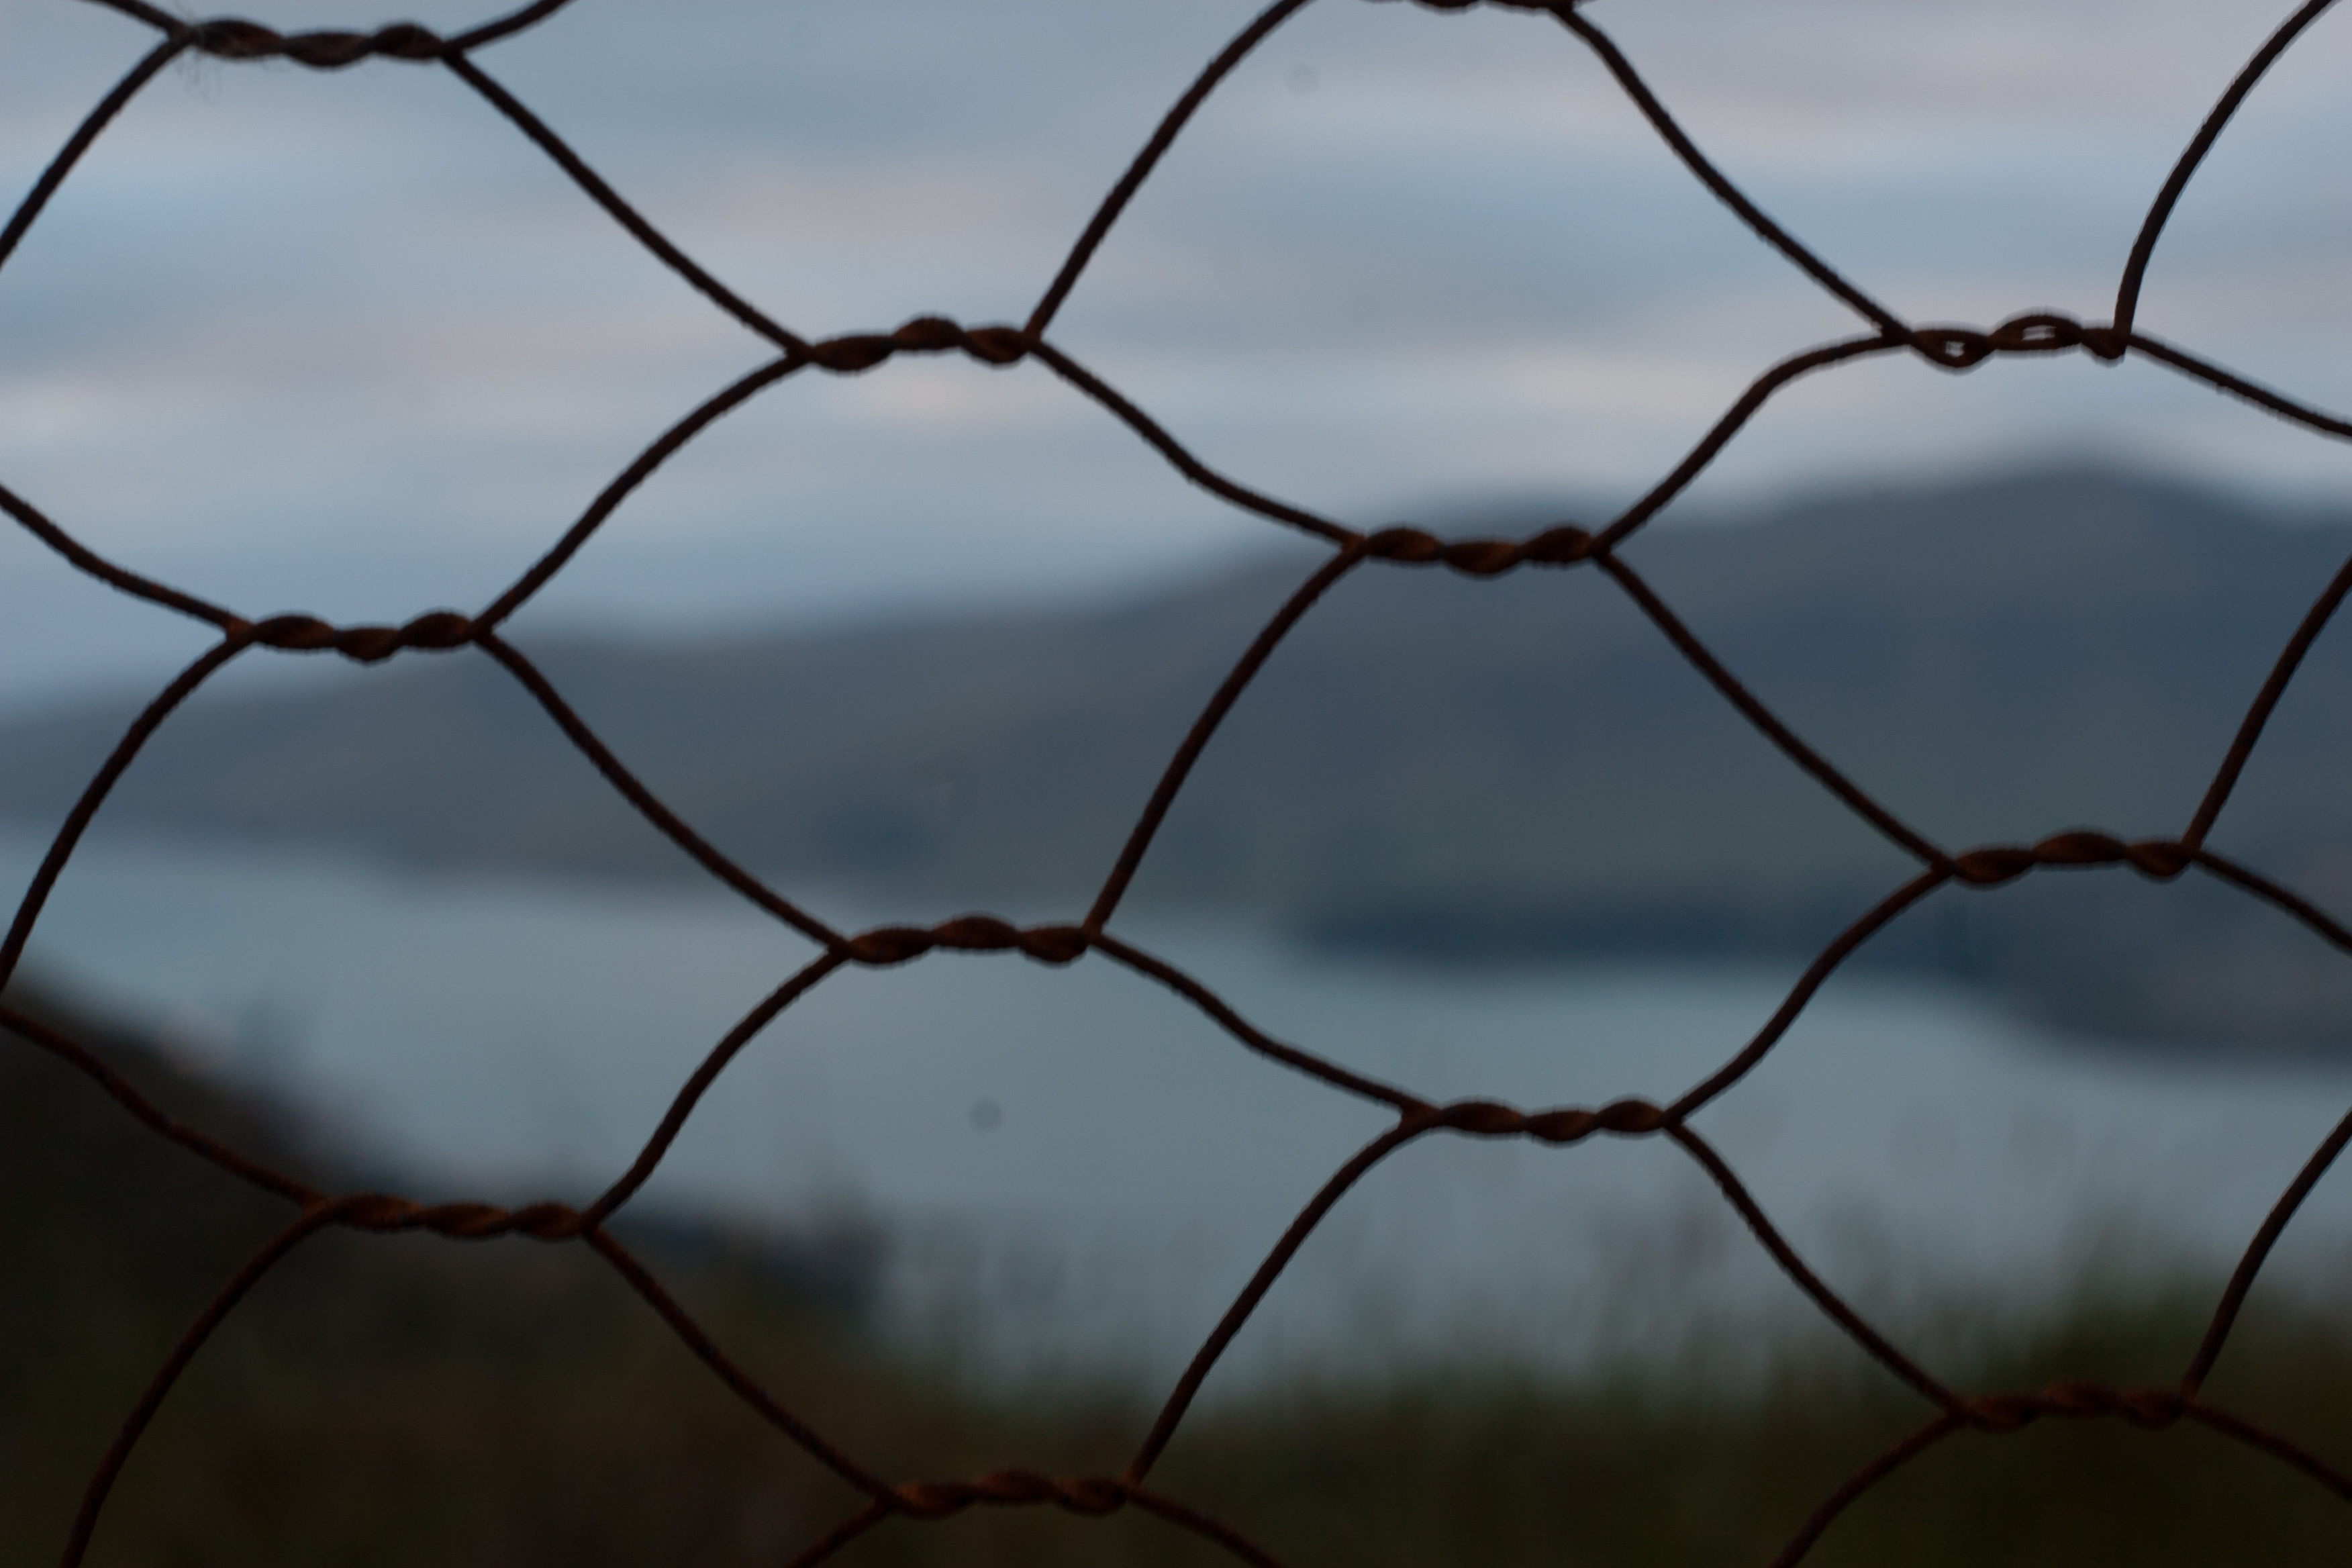 view of diamond harbor through a wire fence